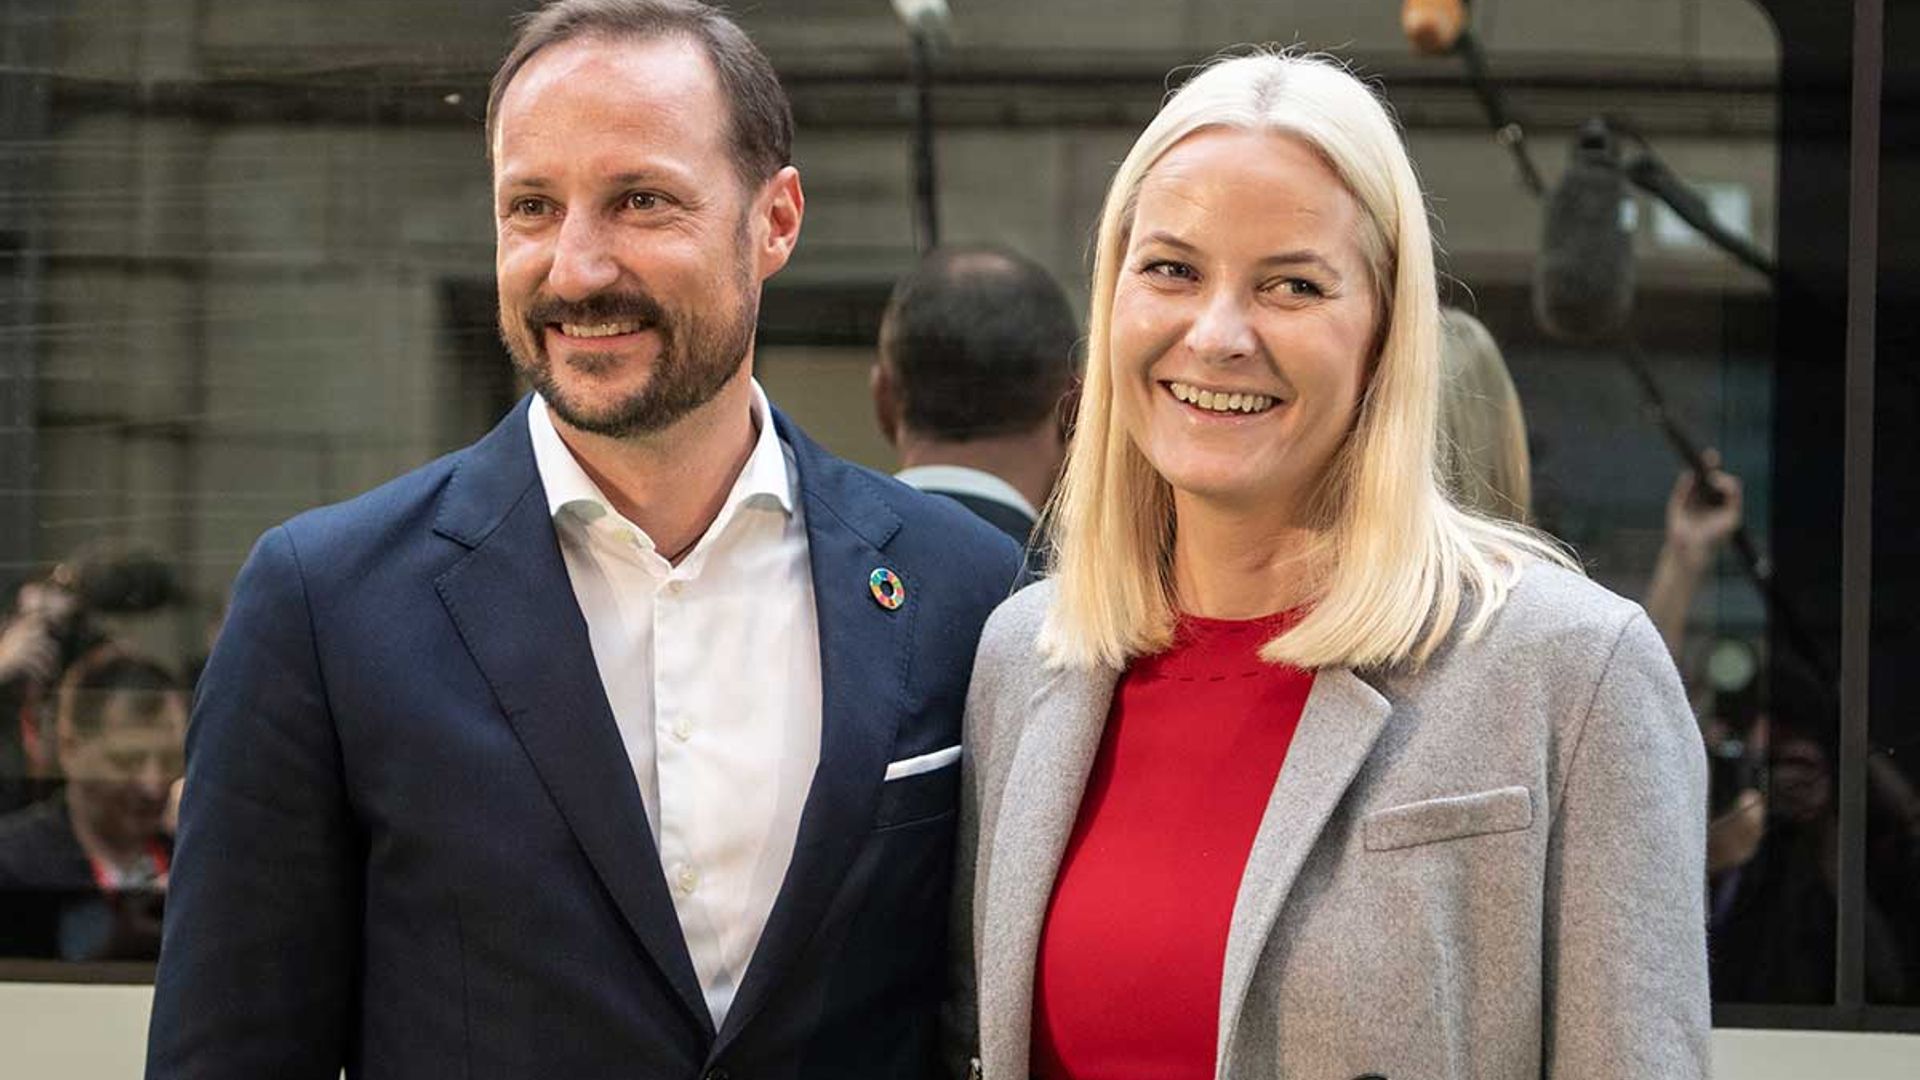 Crown Princess Mette-Marit of Norway shares sweet kissing photo with husband Haakon on ski trip